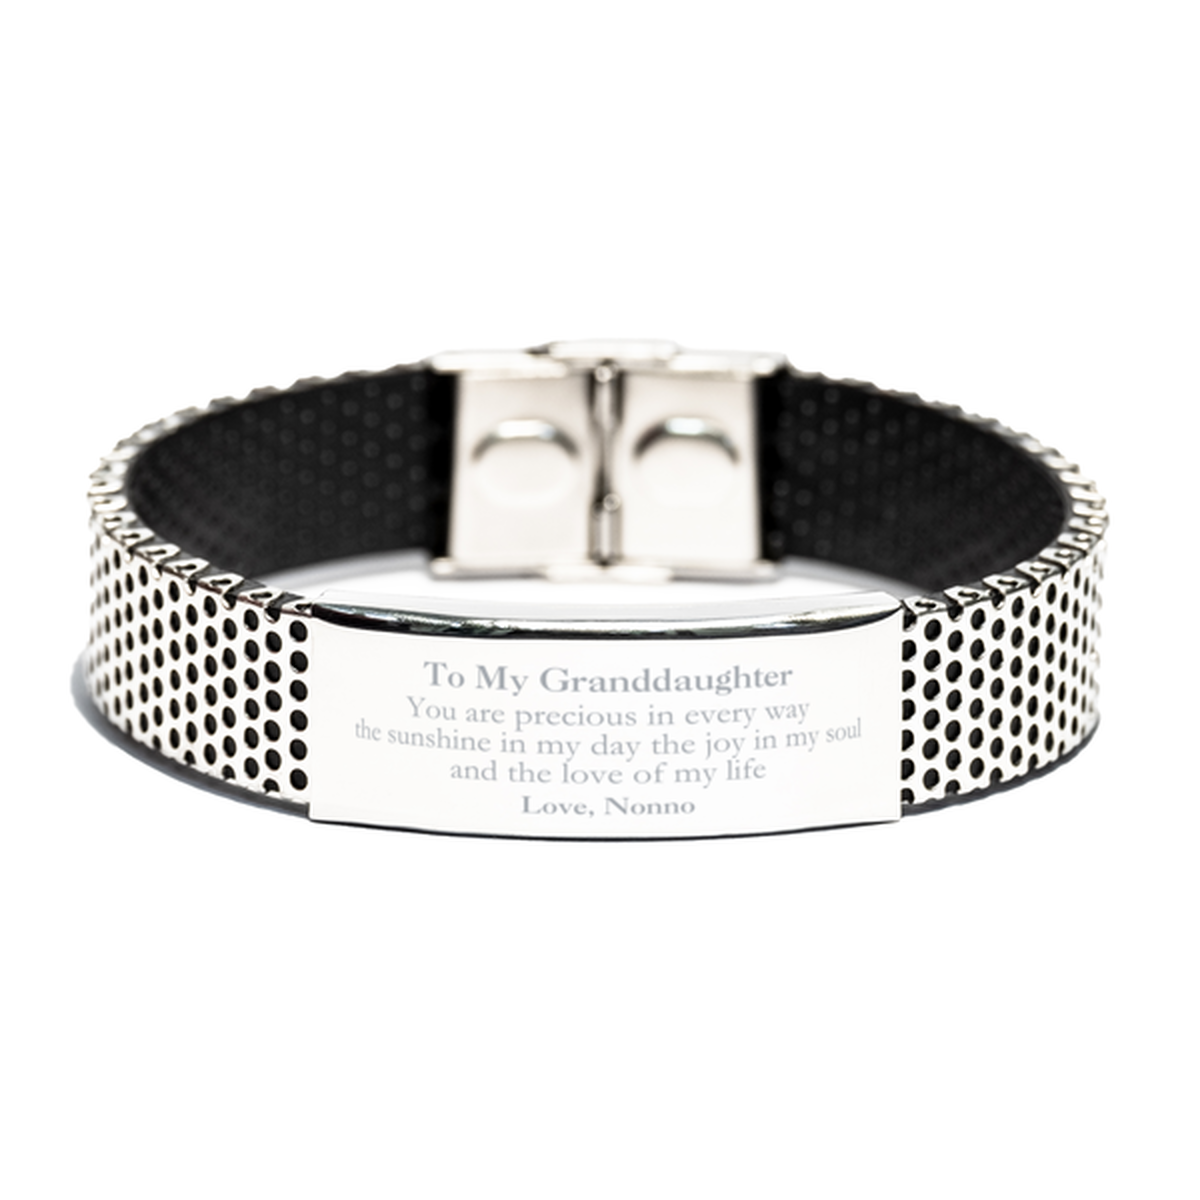 Graduation Gifts for Granddaughter Stainless Steel Bracelet Present from Nonno, Christmas Granddaughter Birthday Gifts Granddaughter You are precious in every way the sunshine in my day. Love, Nonno